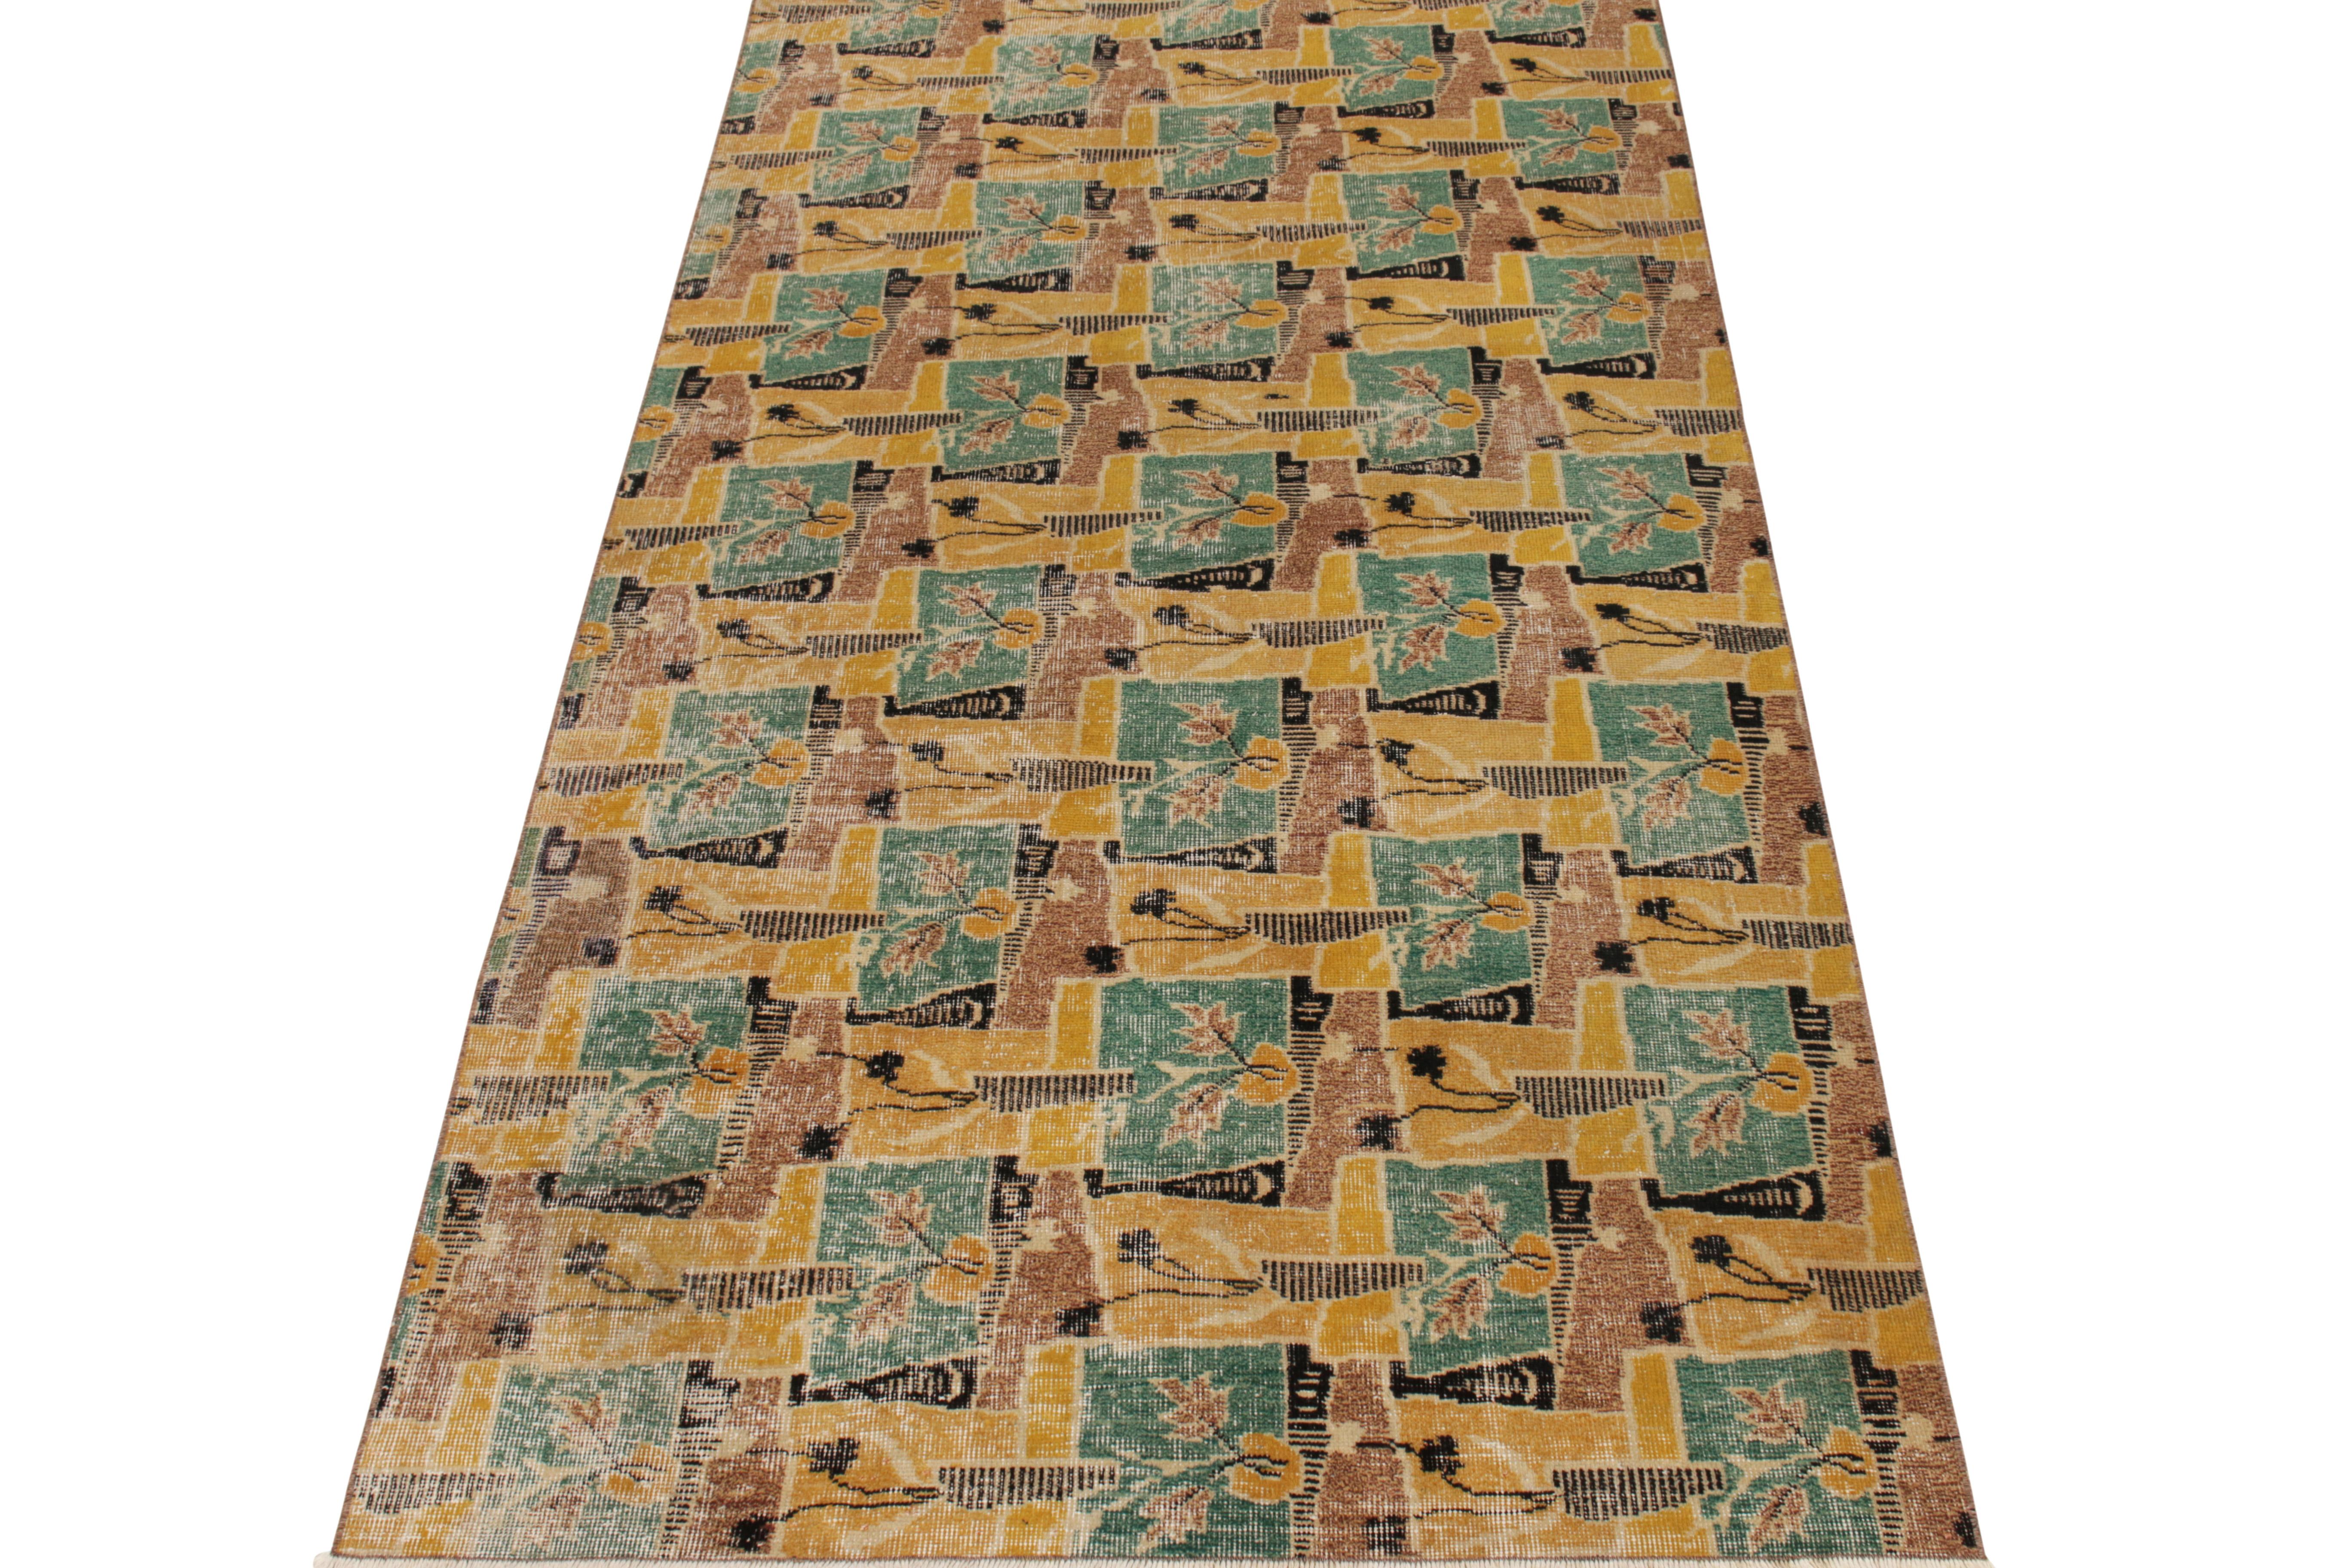 Hand-knotted in wool, a 4x6 vintage rug from a venerated Turkish designer, joining our commemorative Mid-Century Pasha Collection. The rug features a marriage of art deco & mid century modern sensibilities in chocolate brown, canary yellow, forest